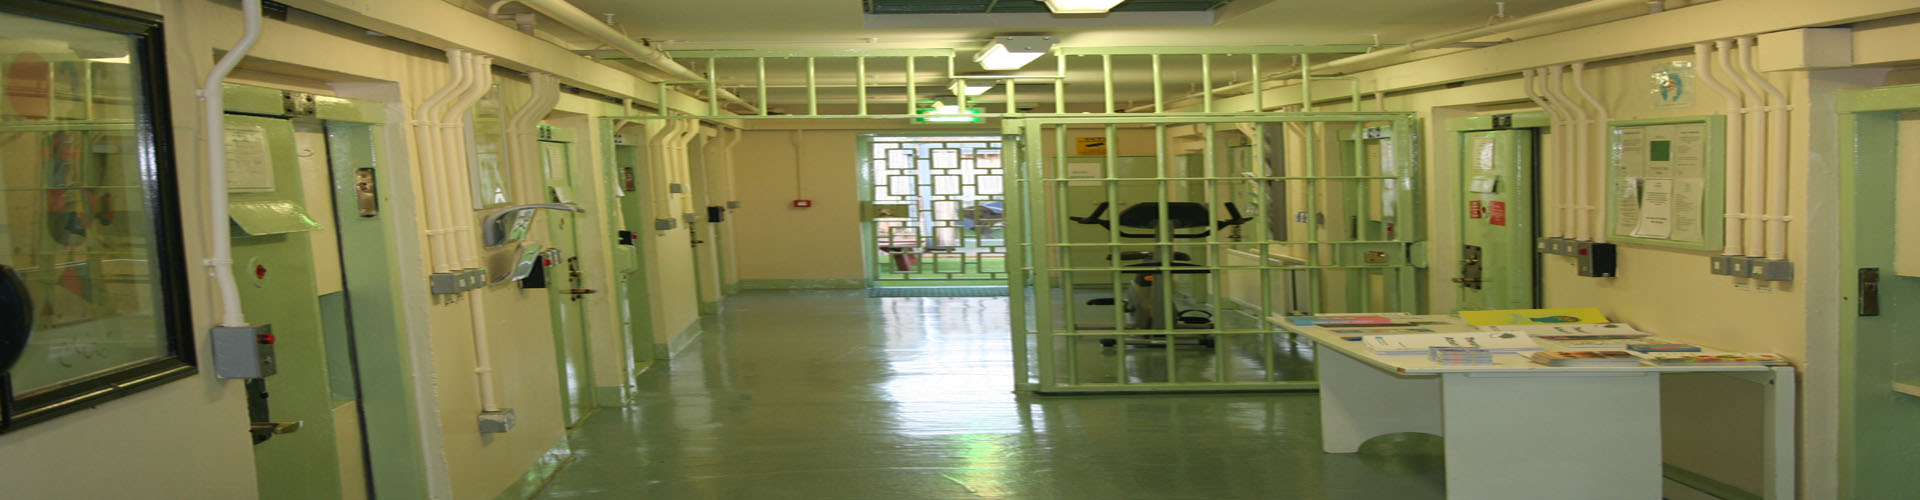 Image of inside of Care and Supervision Unit 